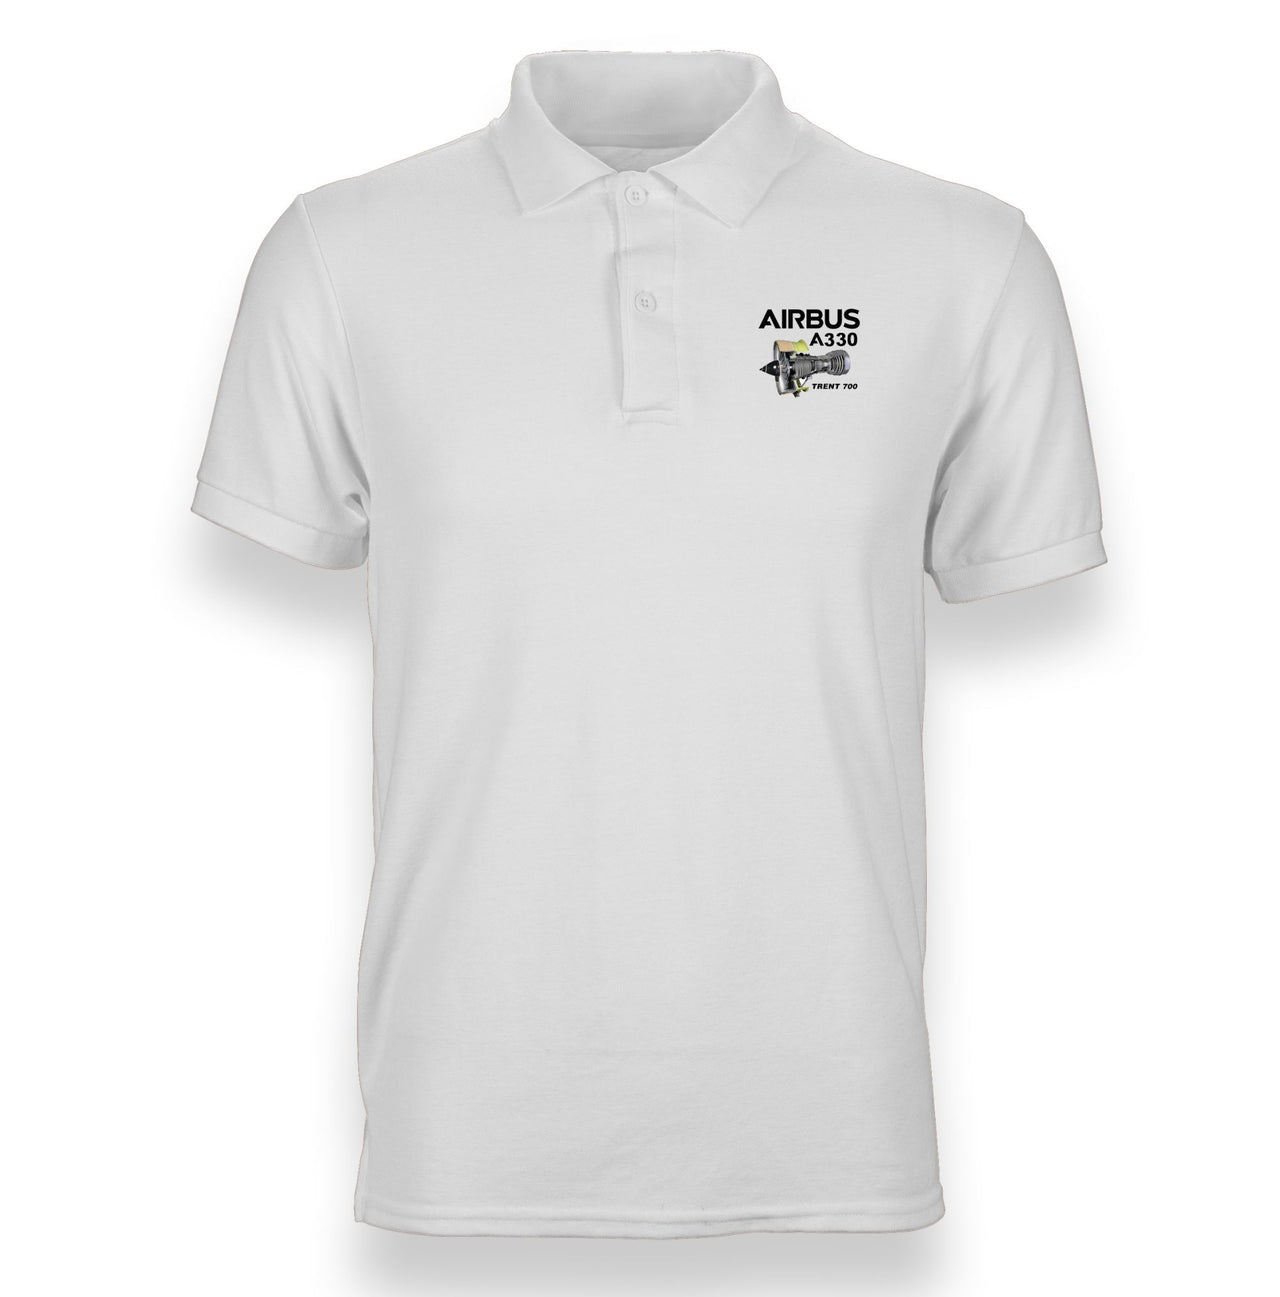 Airbus A330 & Trent 700 Engine Designed "WOMEN" Polo T-Shirts